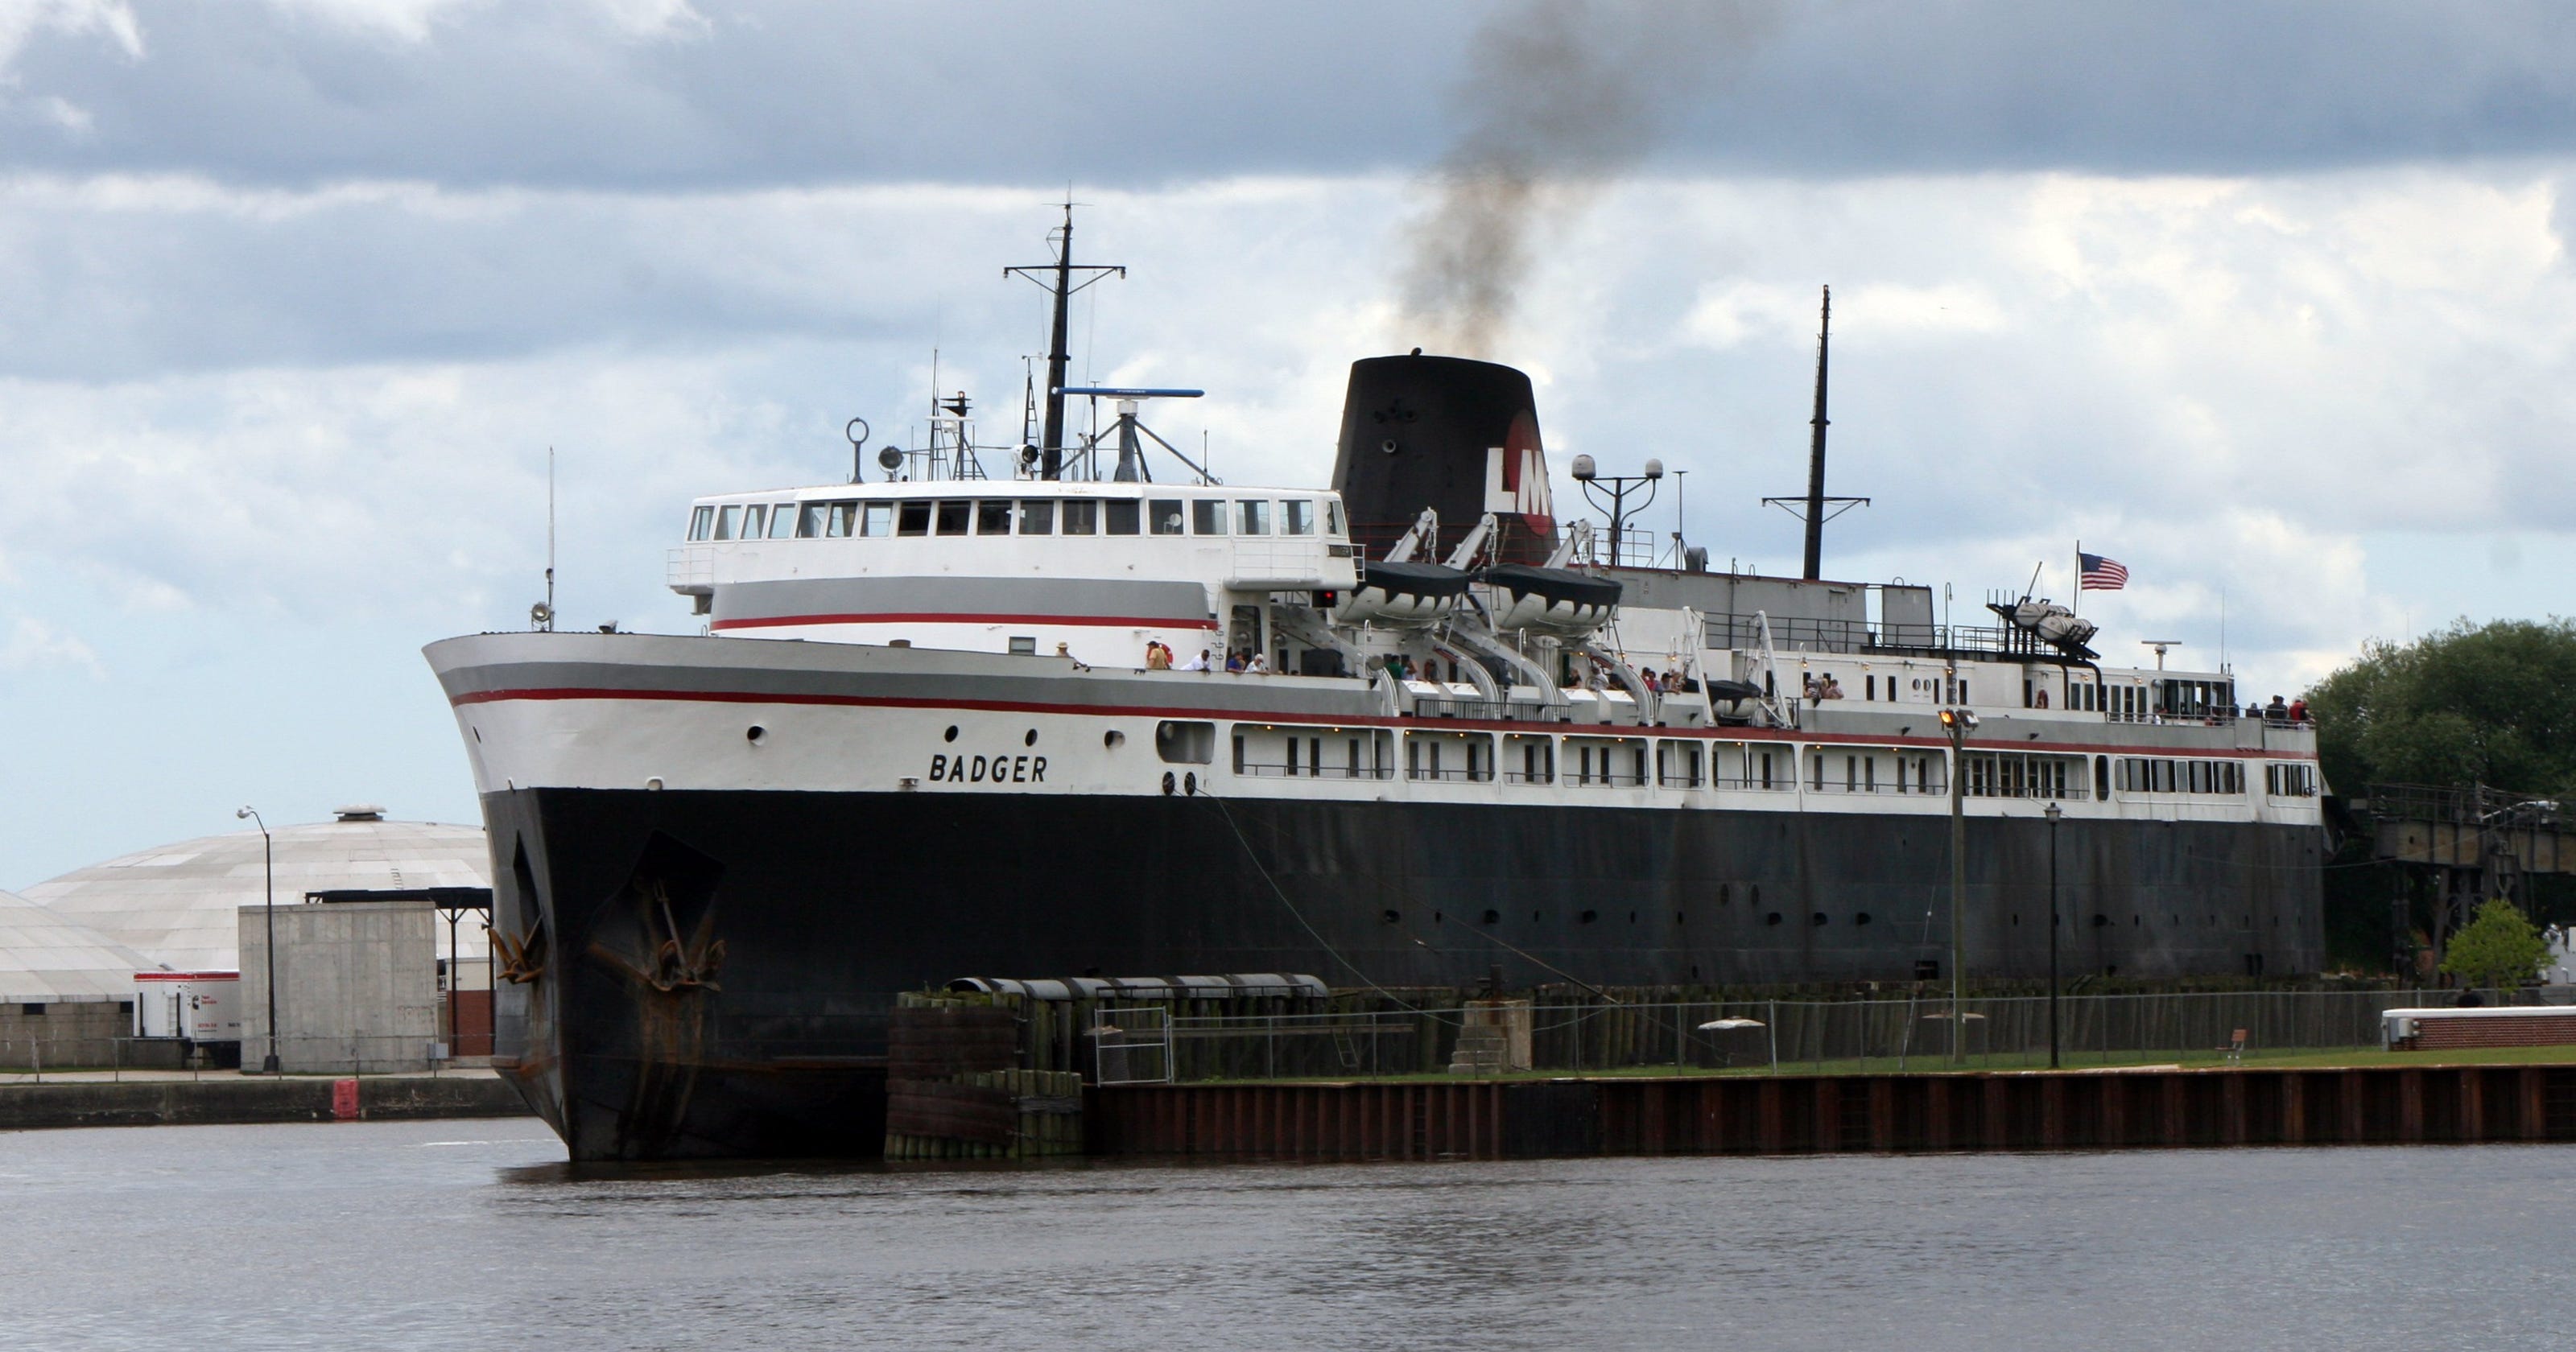 EPA finds S.S. Badger, historic car ferry on Lake Michigan, in